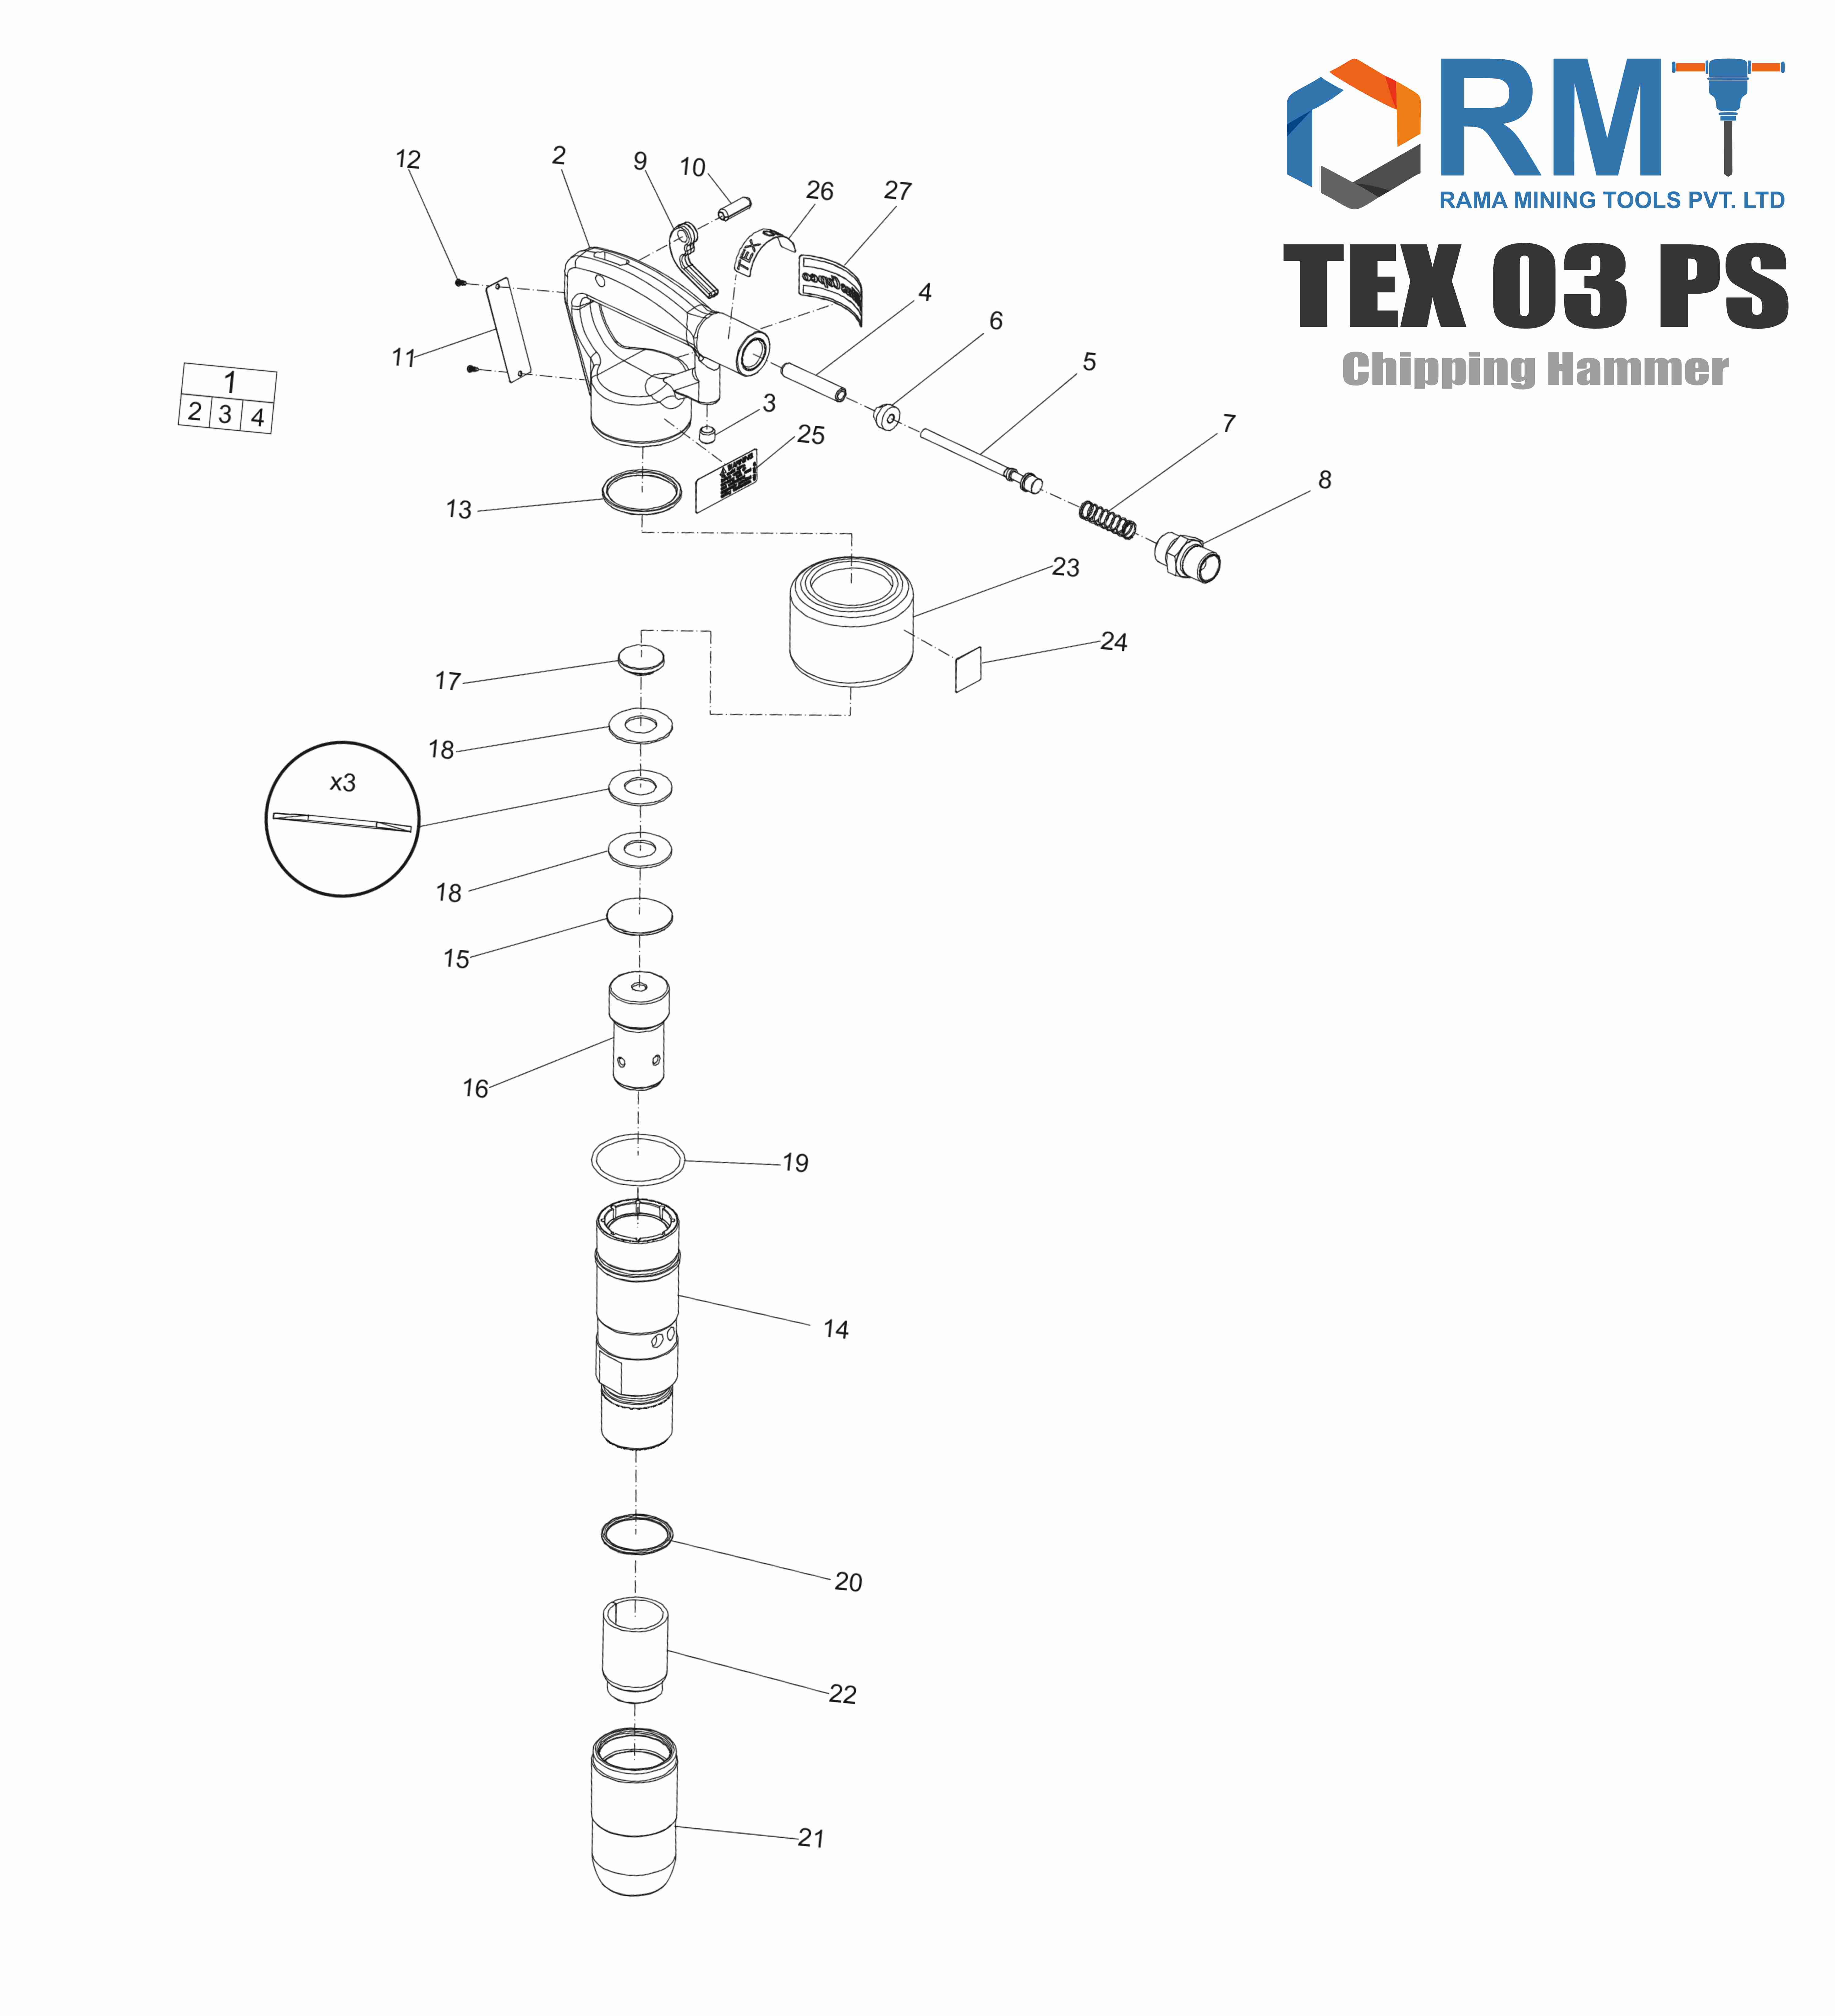 TEX 03 PS - Chipping Hammers